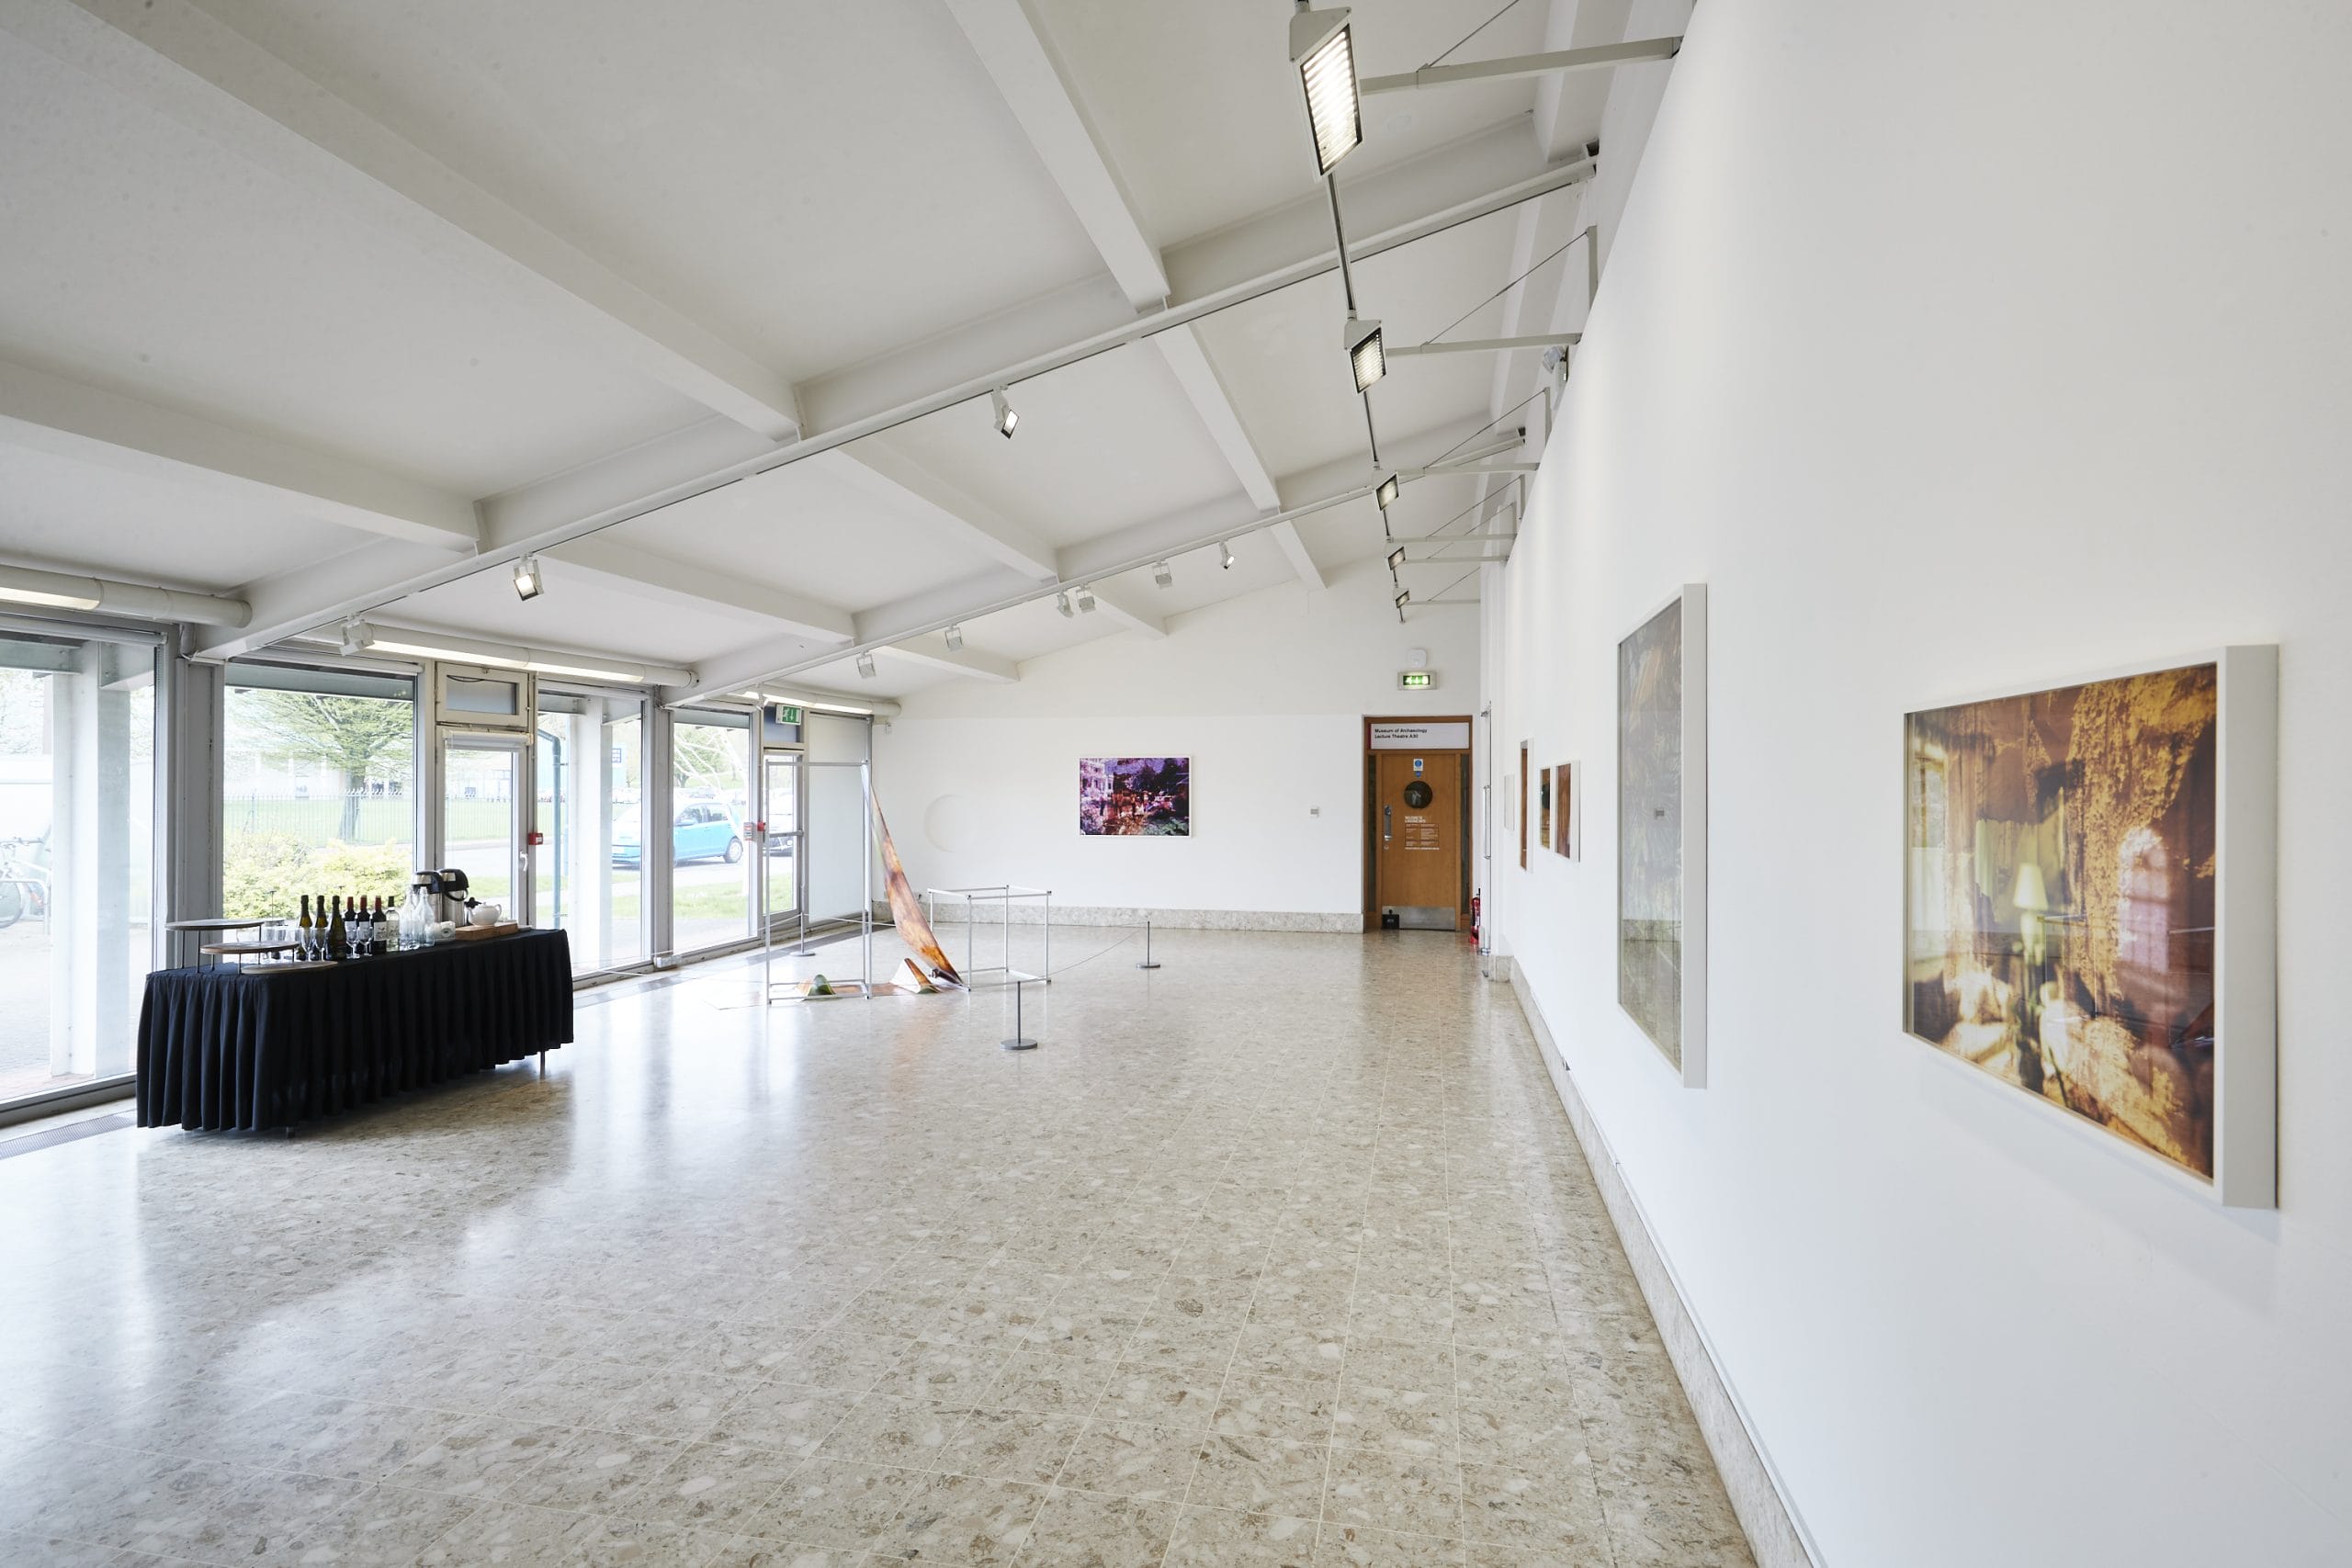 A gallery space with a big window and a sofa looking at artworks on the walls